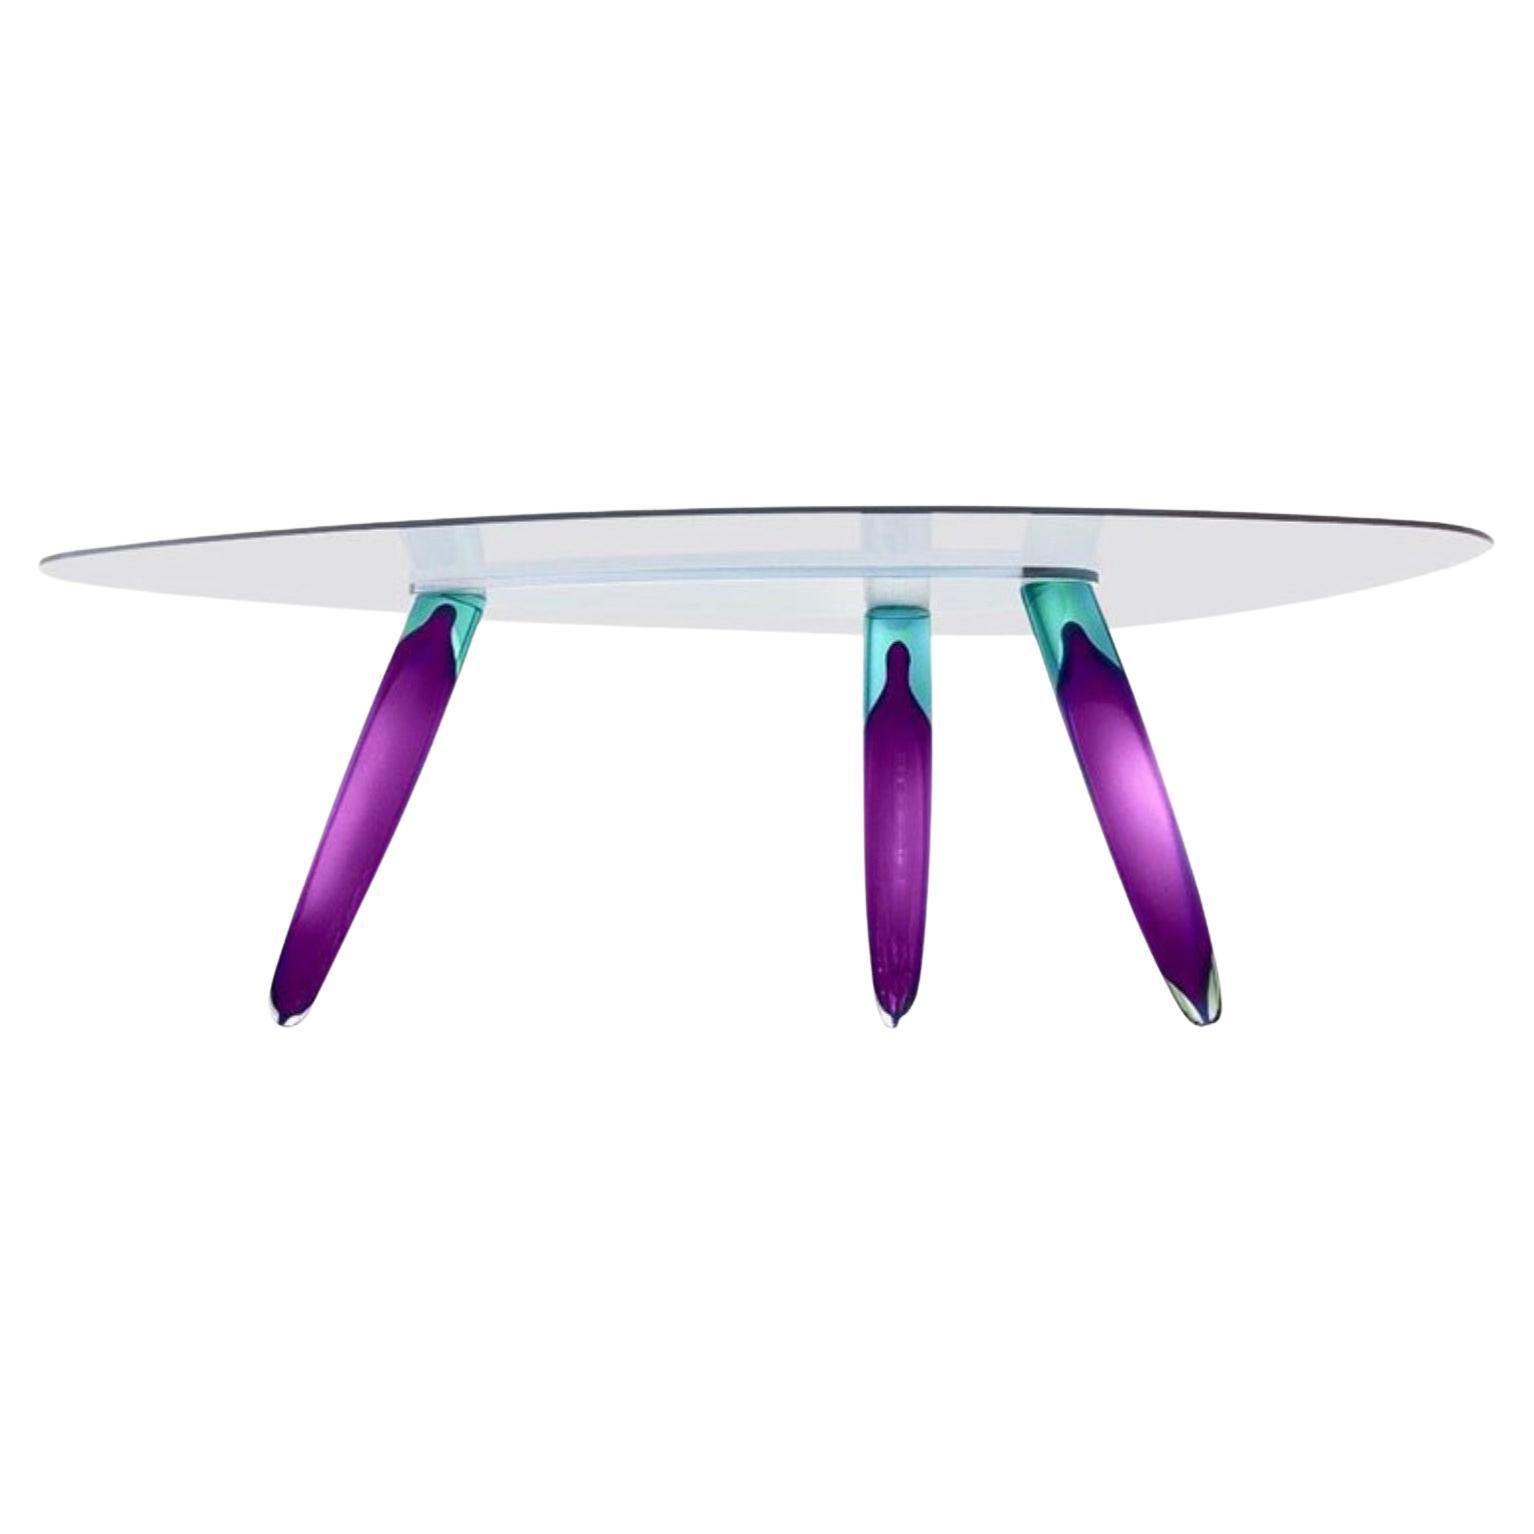 Roche Bobois Murano Art Glass Dining Table by Maurice Barilone, Purple & Blue, A Murano dining table designed by Maurice Barilone for Roche Bobois, Paris, having three legs in two-tone blown glass, signed at the base of one leg, measures: height